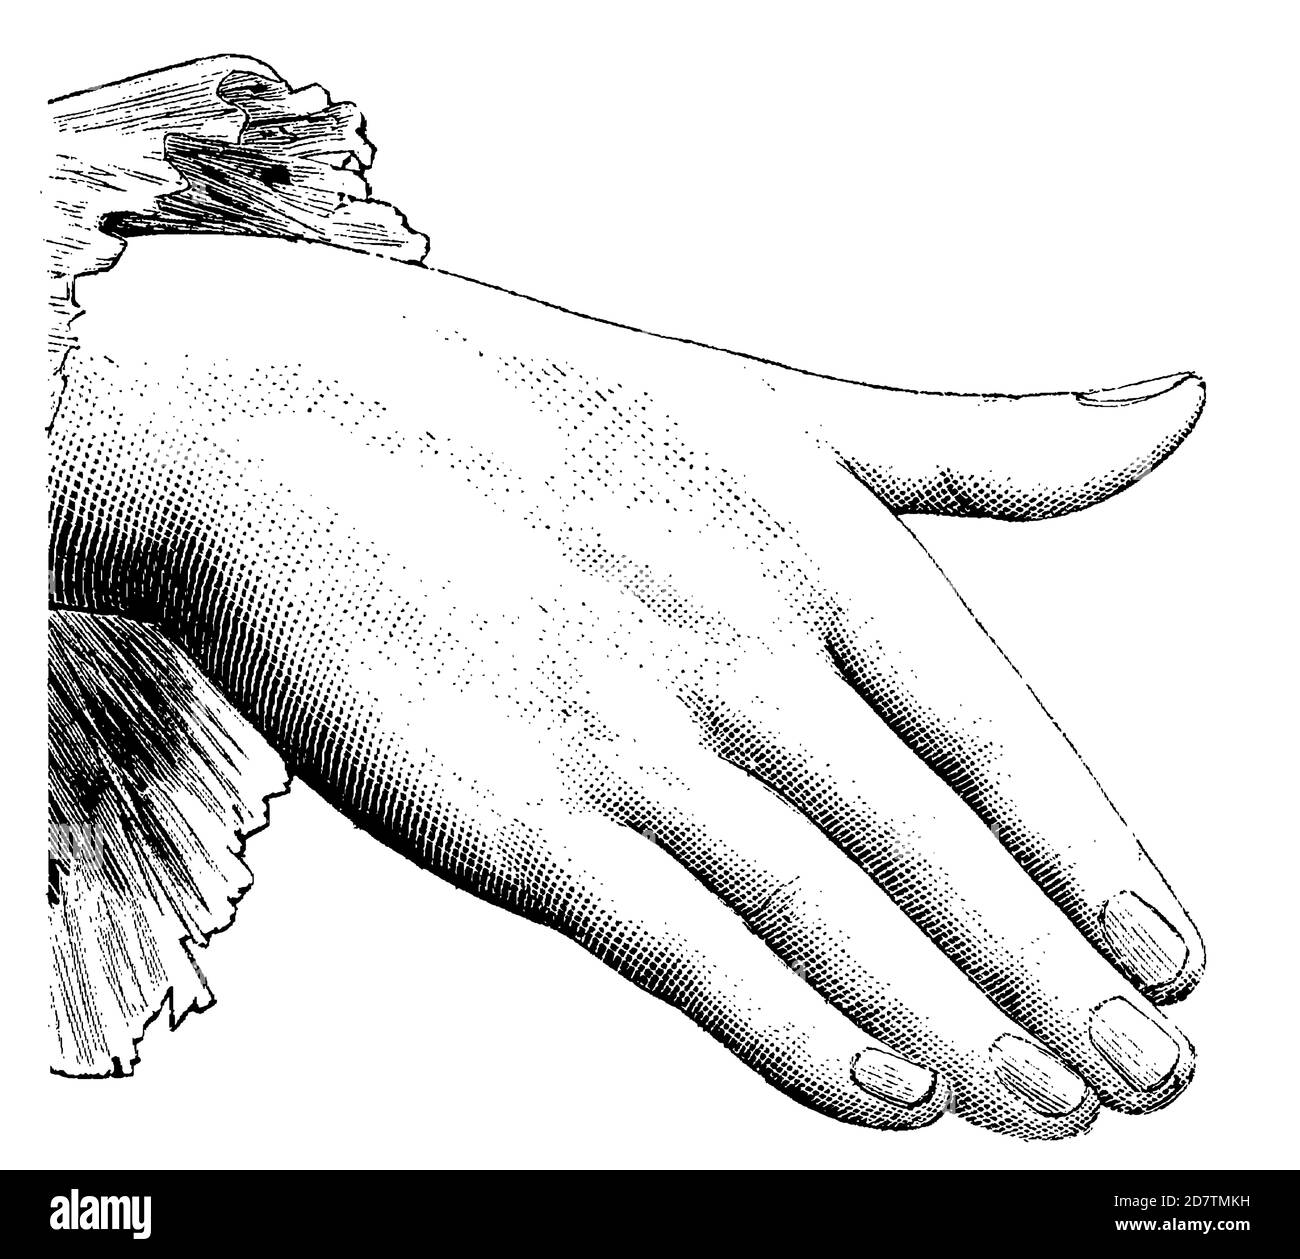 Hand illustration, 19th century black and white drawing Stock Photo